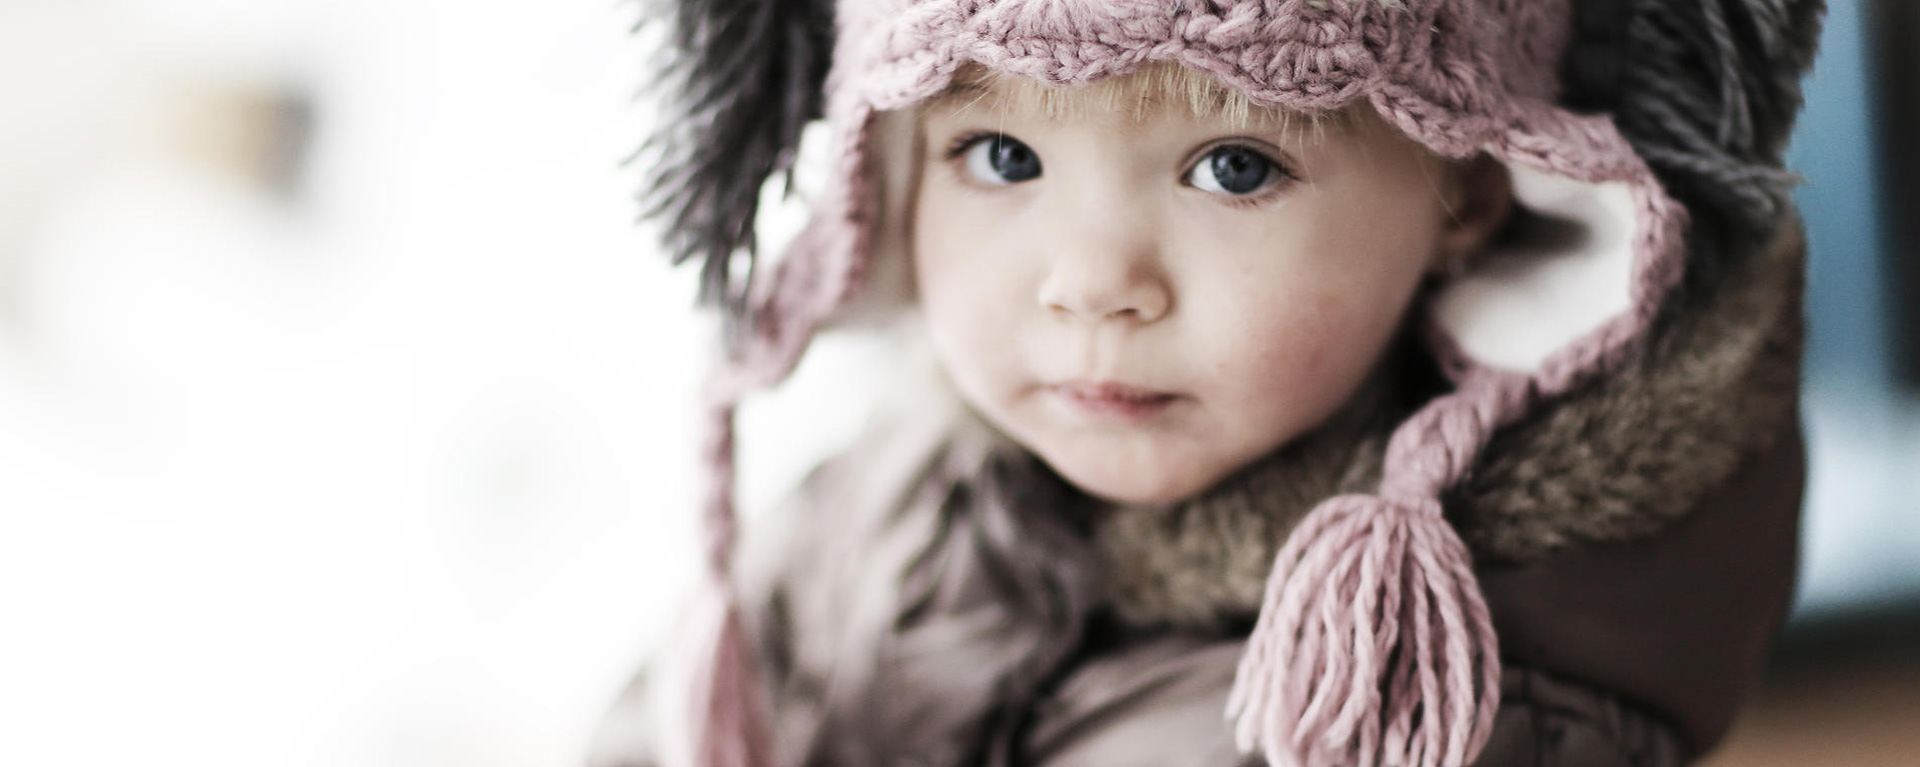 Photograph of a child in a knitted hat